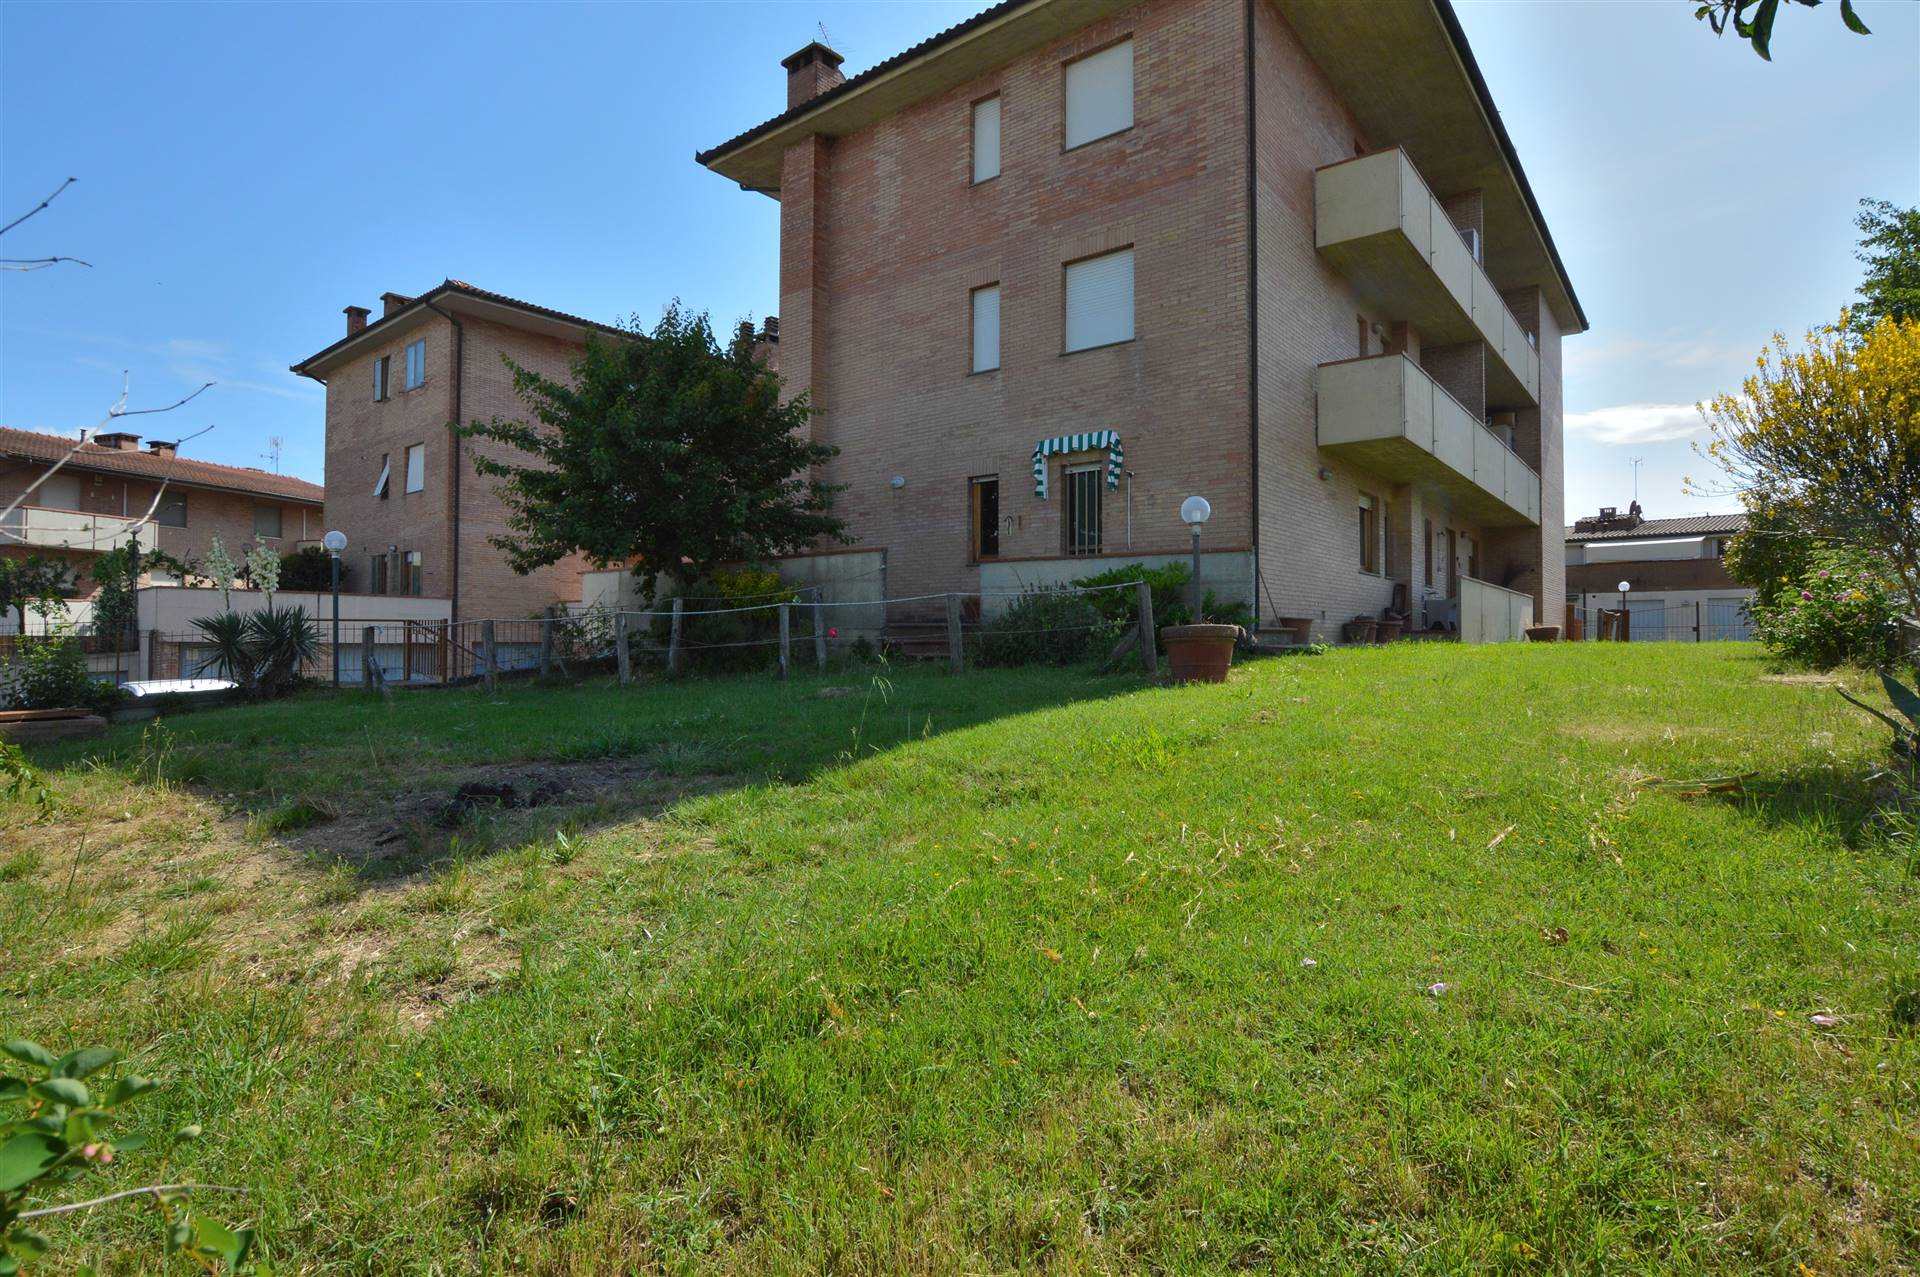 SAN ROCCO A PILLI, SOVICILLE, Apartment for sale of 182 Sq. mt., Habitable, Heating Individual heating system, Energetic class: G, Epi: 175 kwh/m2 year, placed at Ground on 2, composed by: 7 Rooms, 